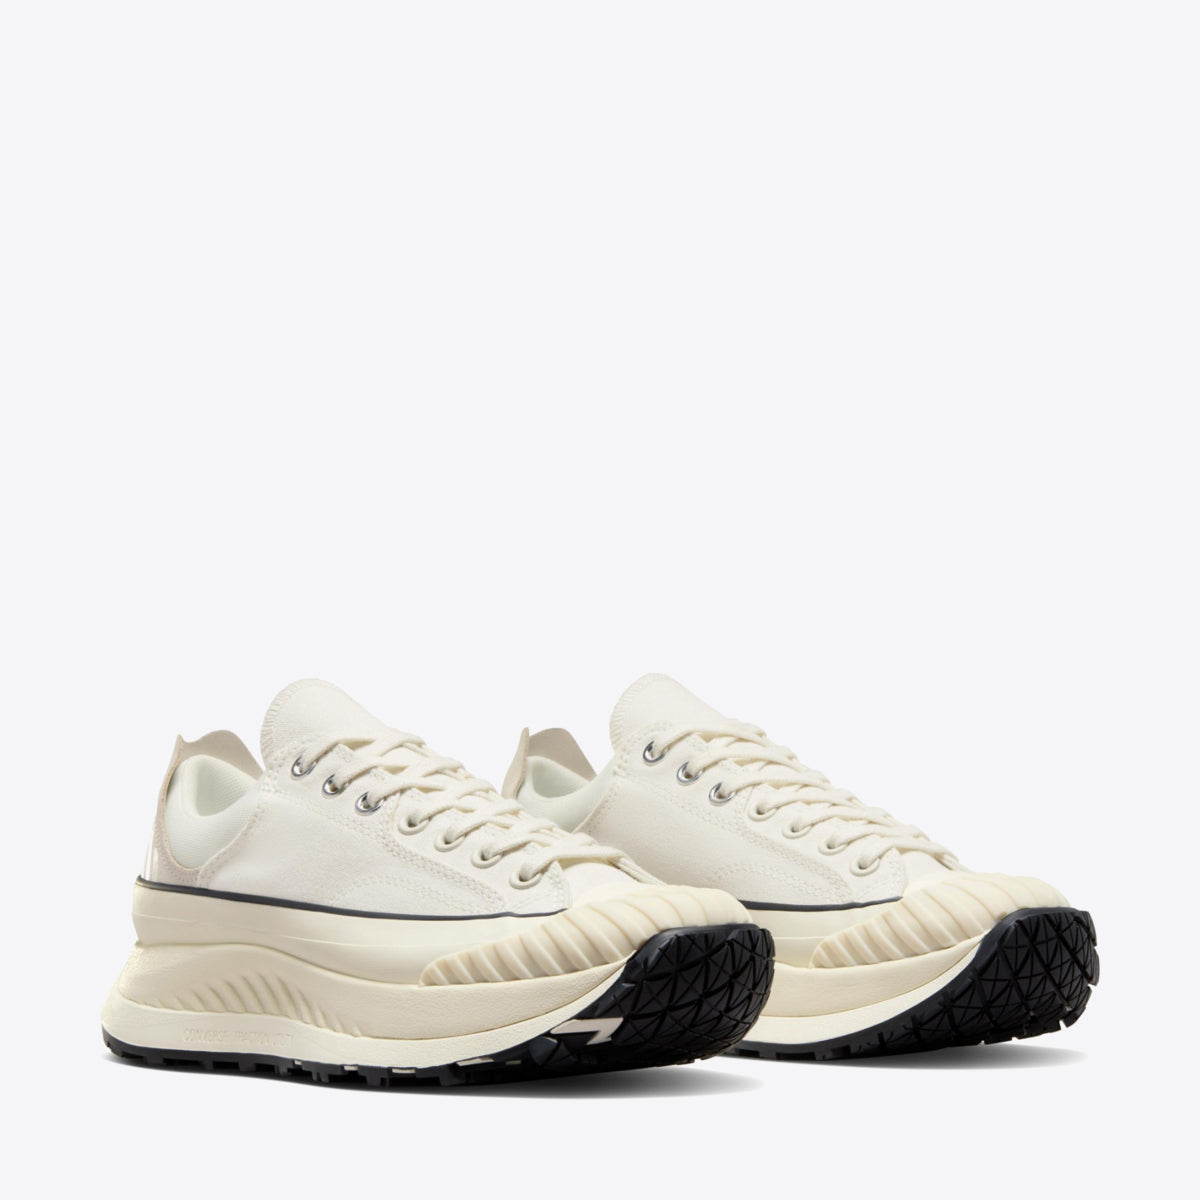 CONVERSE CT 70 AT Future Utility Low White - Image 5